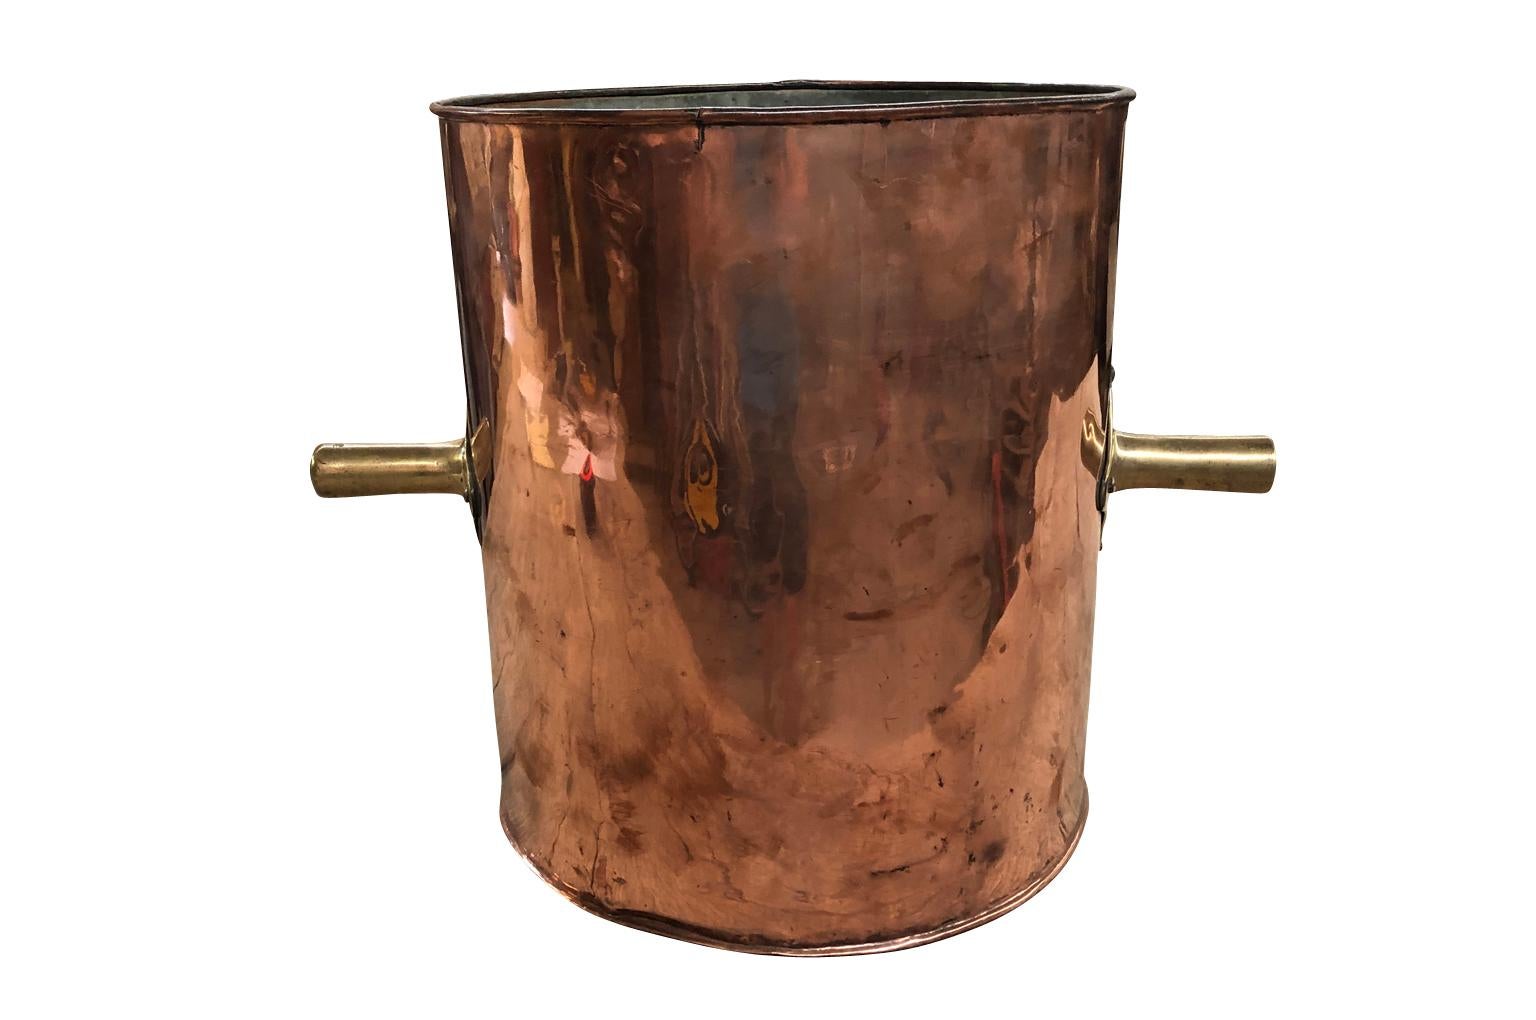 A very beautiful French 19th century wine measure in copper from the South of France. A terrific vessel or container to be used in so many ways or converted into a side table.